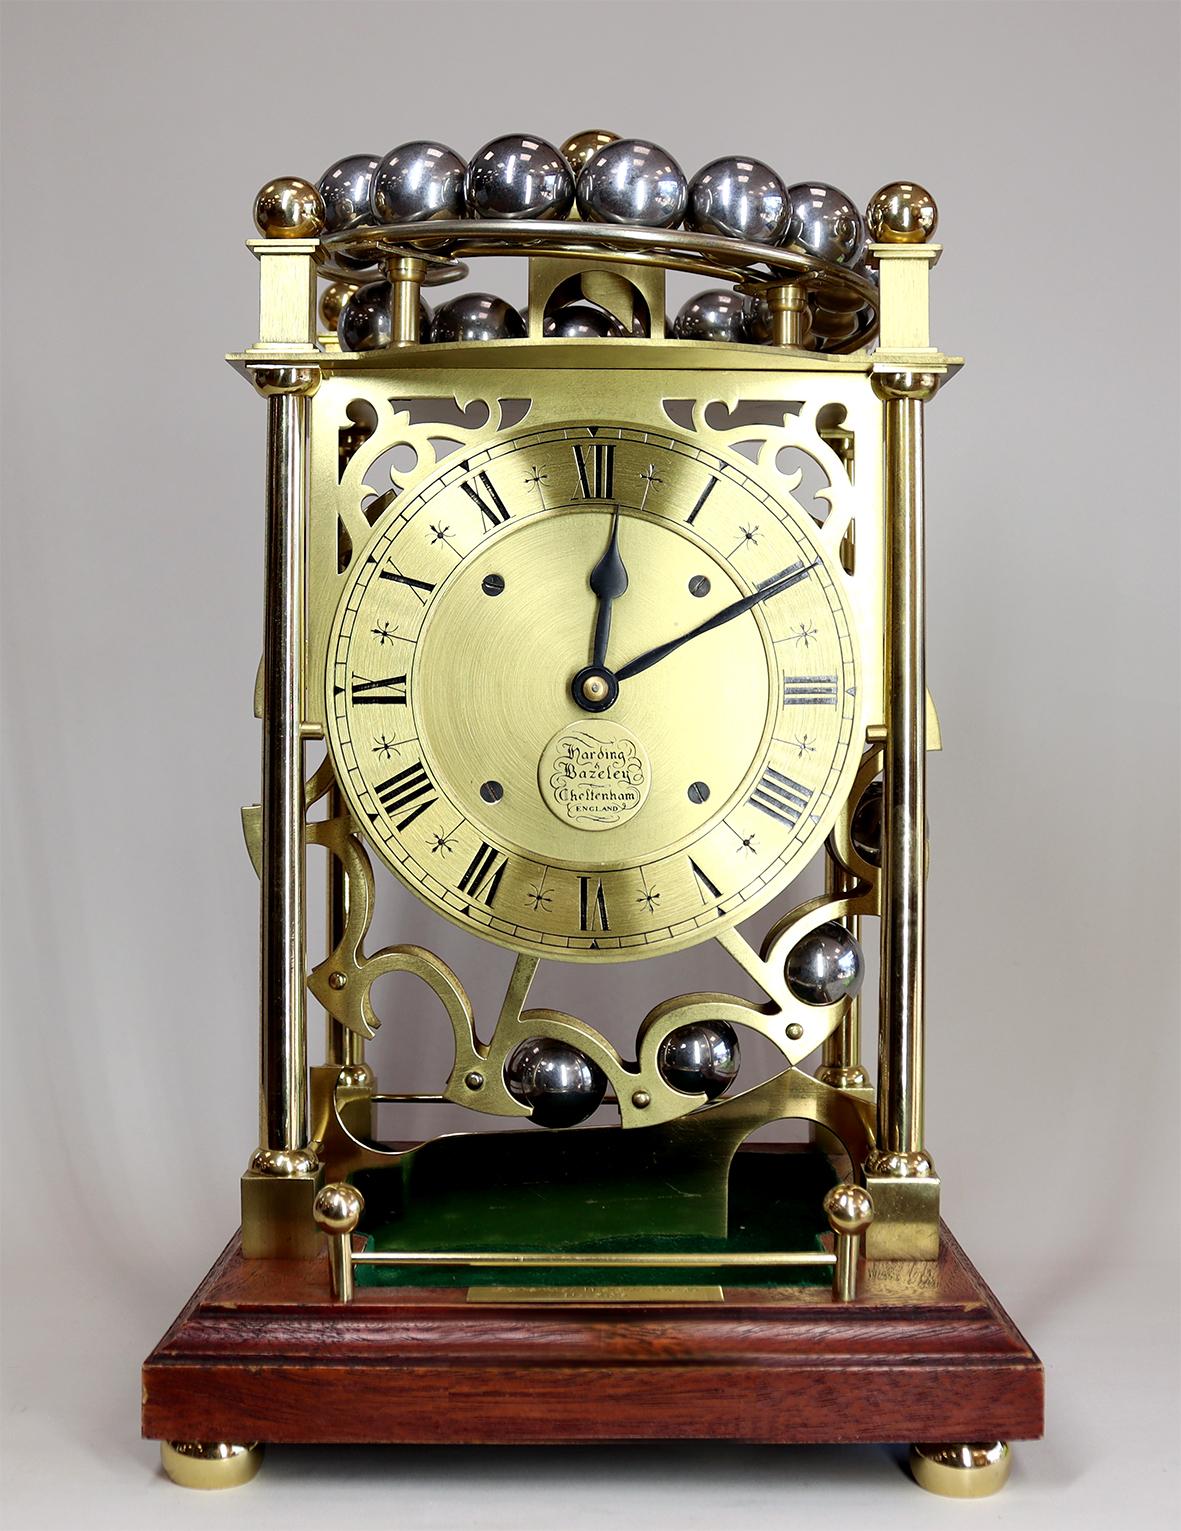 This is a novelty clock from the later half of the 20th century, powered by the weight of its twenty four steel ball bearings as they descend around the carousel wheel and are deposited in the green base trough in the base of the case. They can